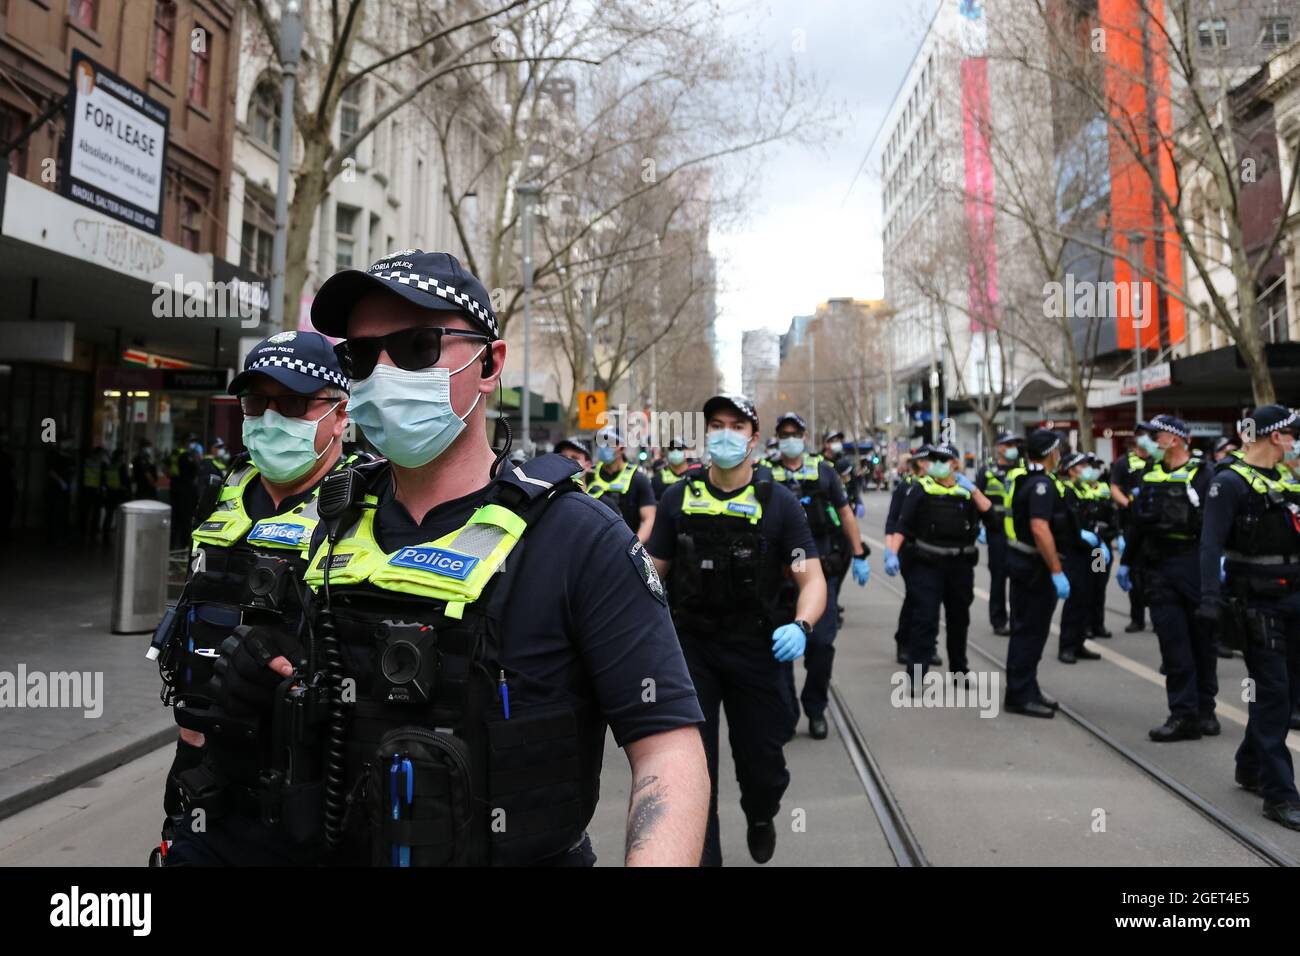 Melbourne, Australia, 21 August, 2021. Hundreds of police are seen during the Freedom protest on August 21, 2021 in Melbourne, Australia. Freedom protests are being held around the country in response to the governments COVID-19 restrictions and continuing removal of liberties.  Credit: Dave Hewison/Speed Media/Alamy Live News Stock Photo